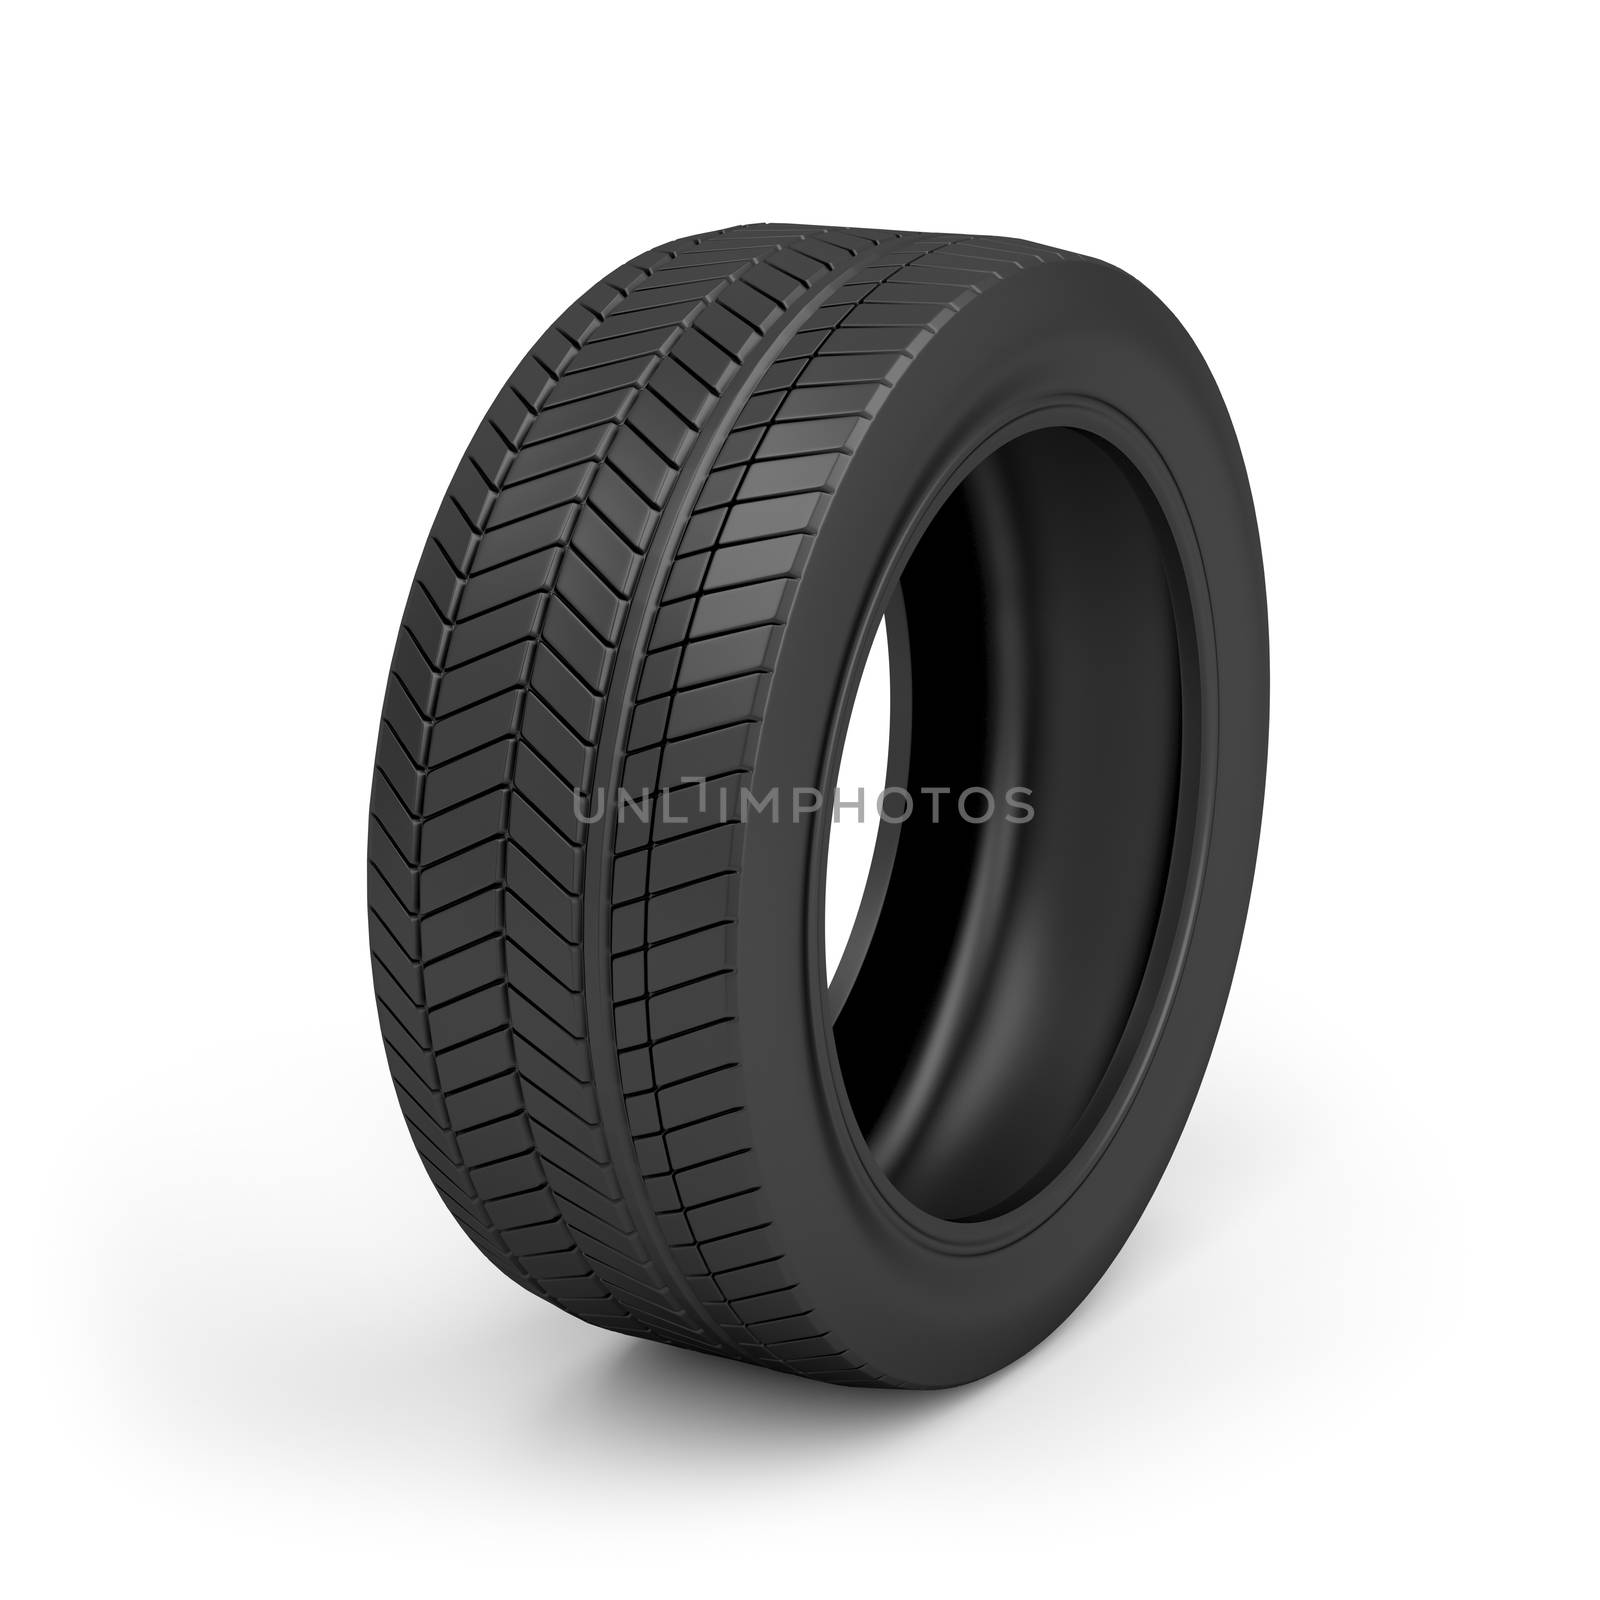 Car tire by magraphics